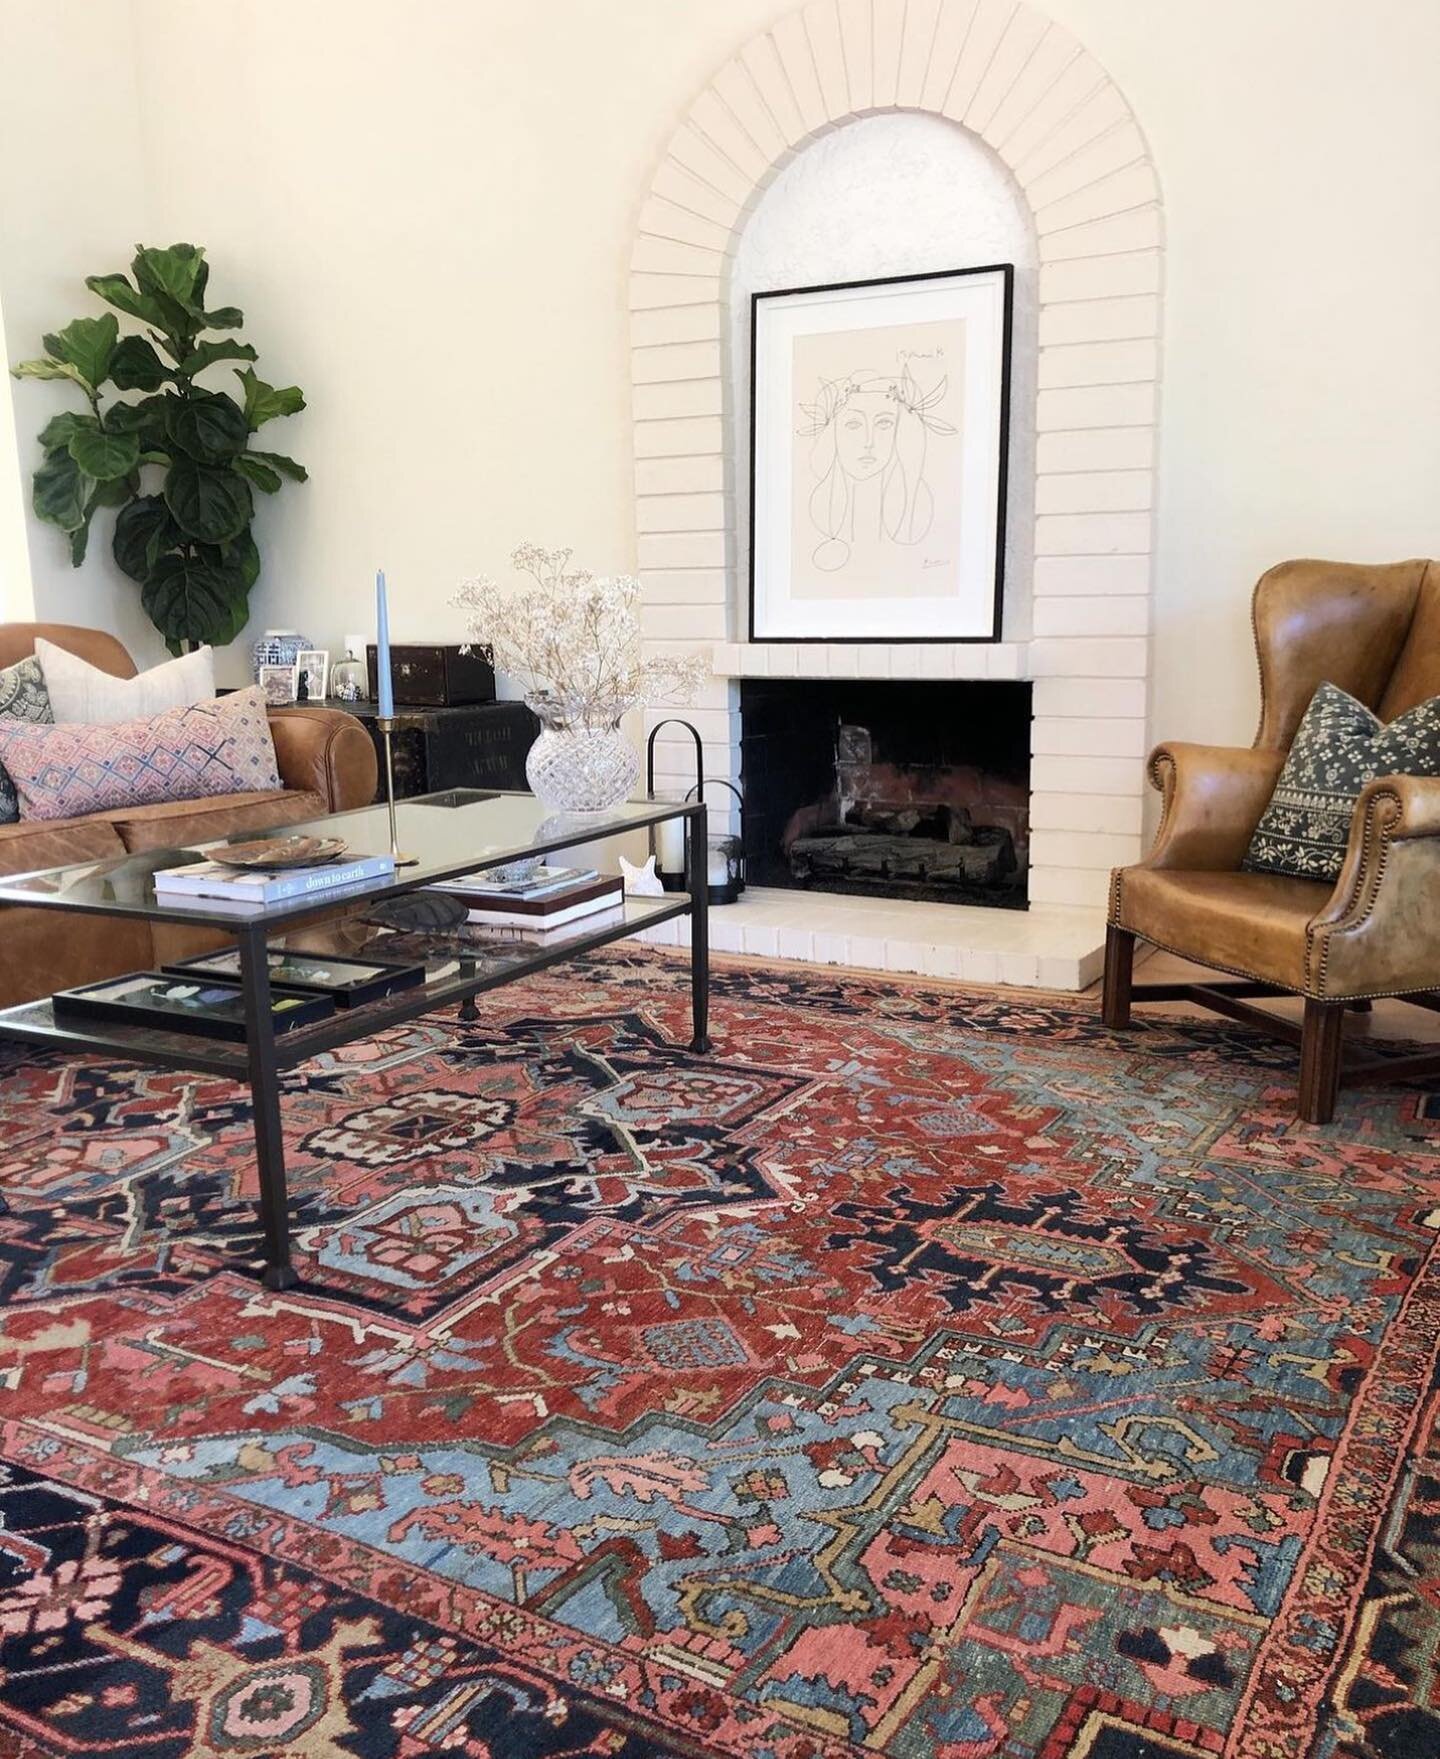 One of my absolute favorite Heriz rugs sitting picture perfect here. French blue corner beauties in this style and size are becoming extremely hard to find. Did I mention she has the softest pile? Hurry on over now to shop and claim &ldquo;Oakley&rdq